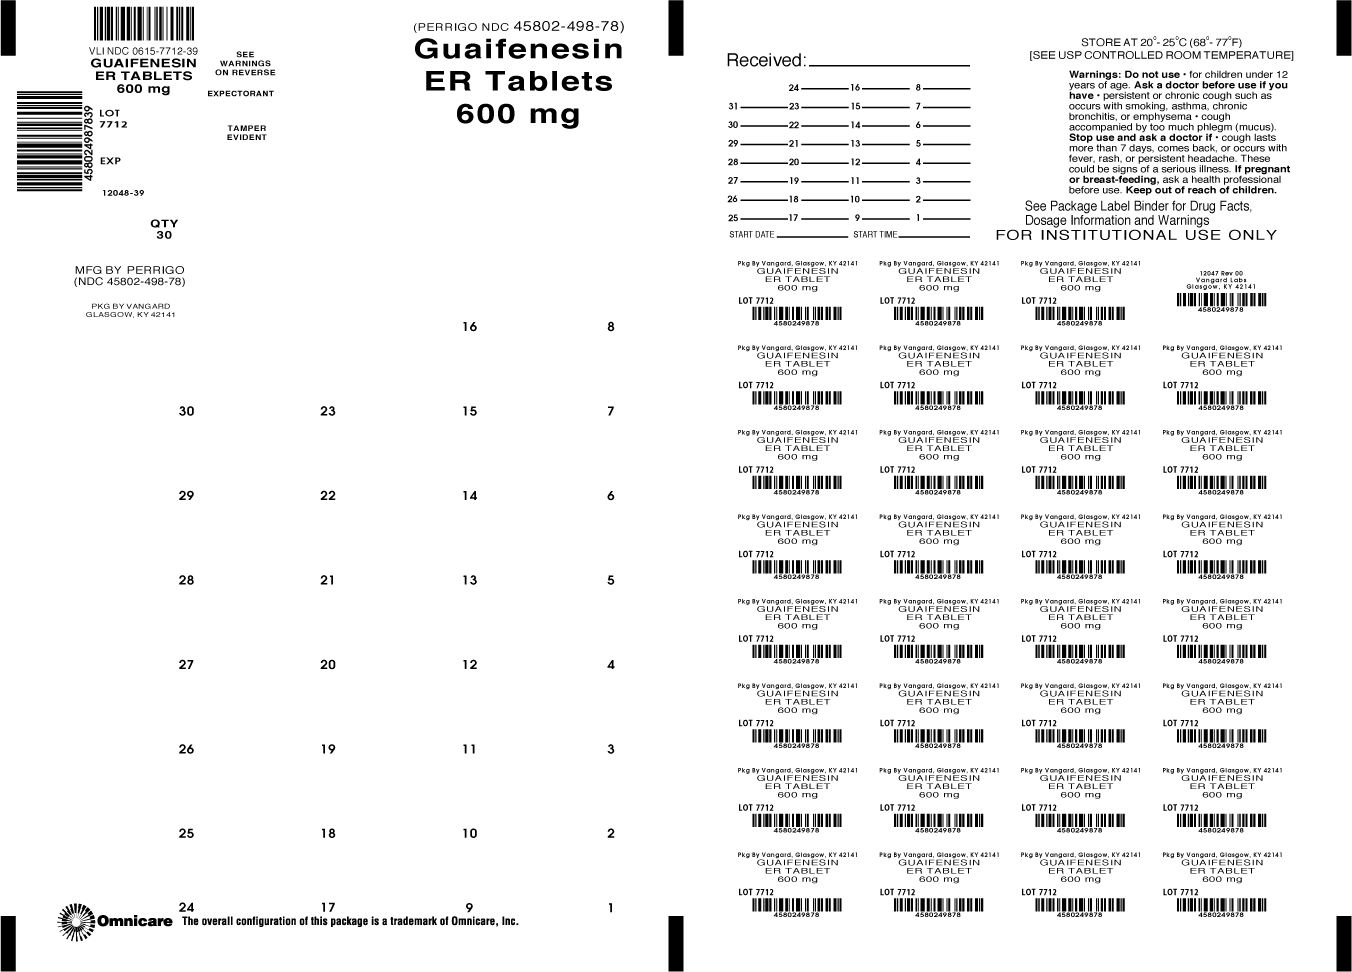 GUAIFENESIN EXTENDED RELEASE EXTENDED RELEASE guaifenesin tablet